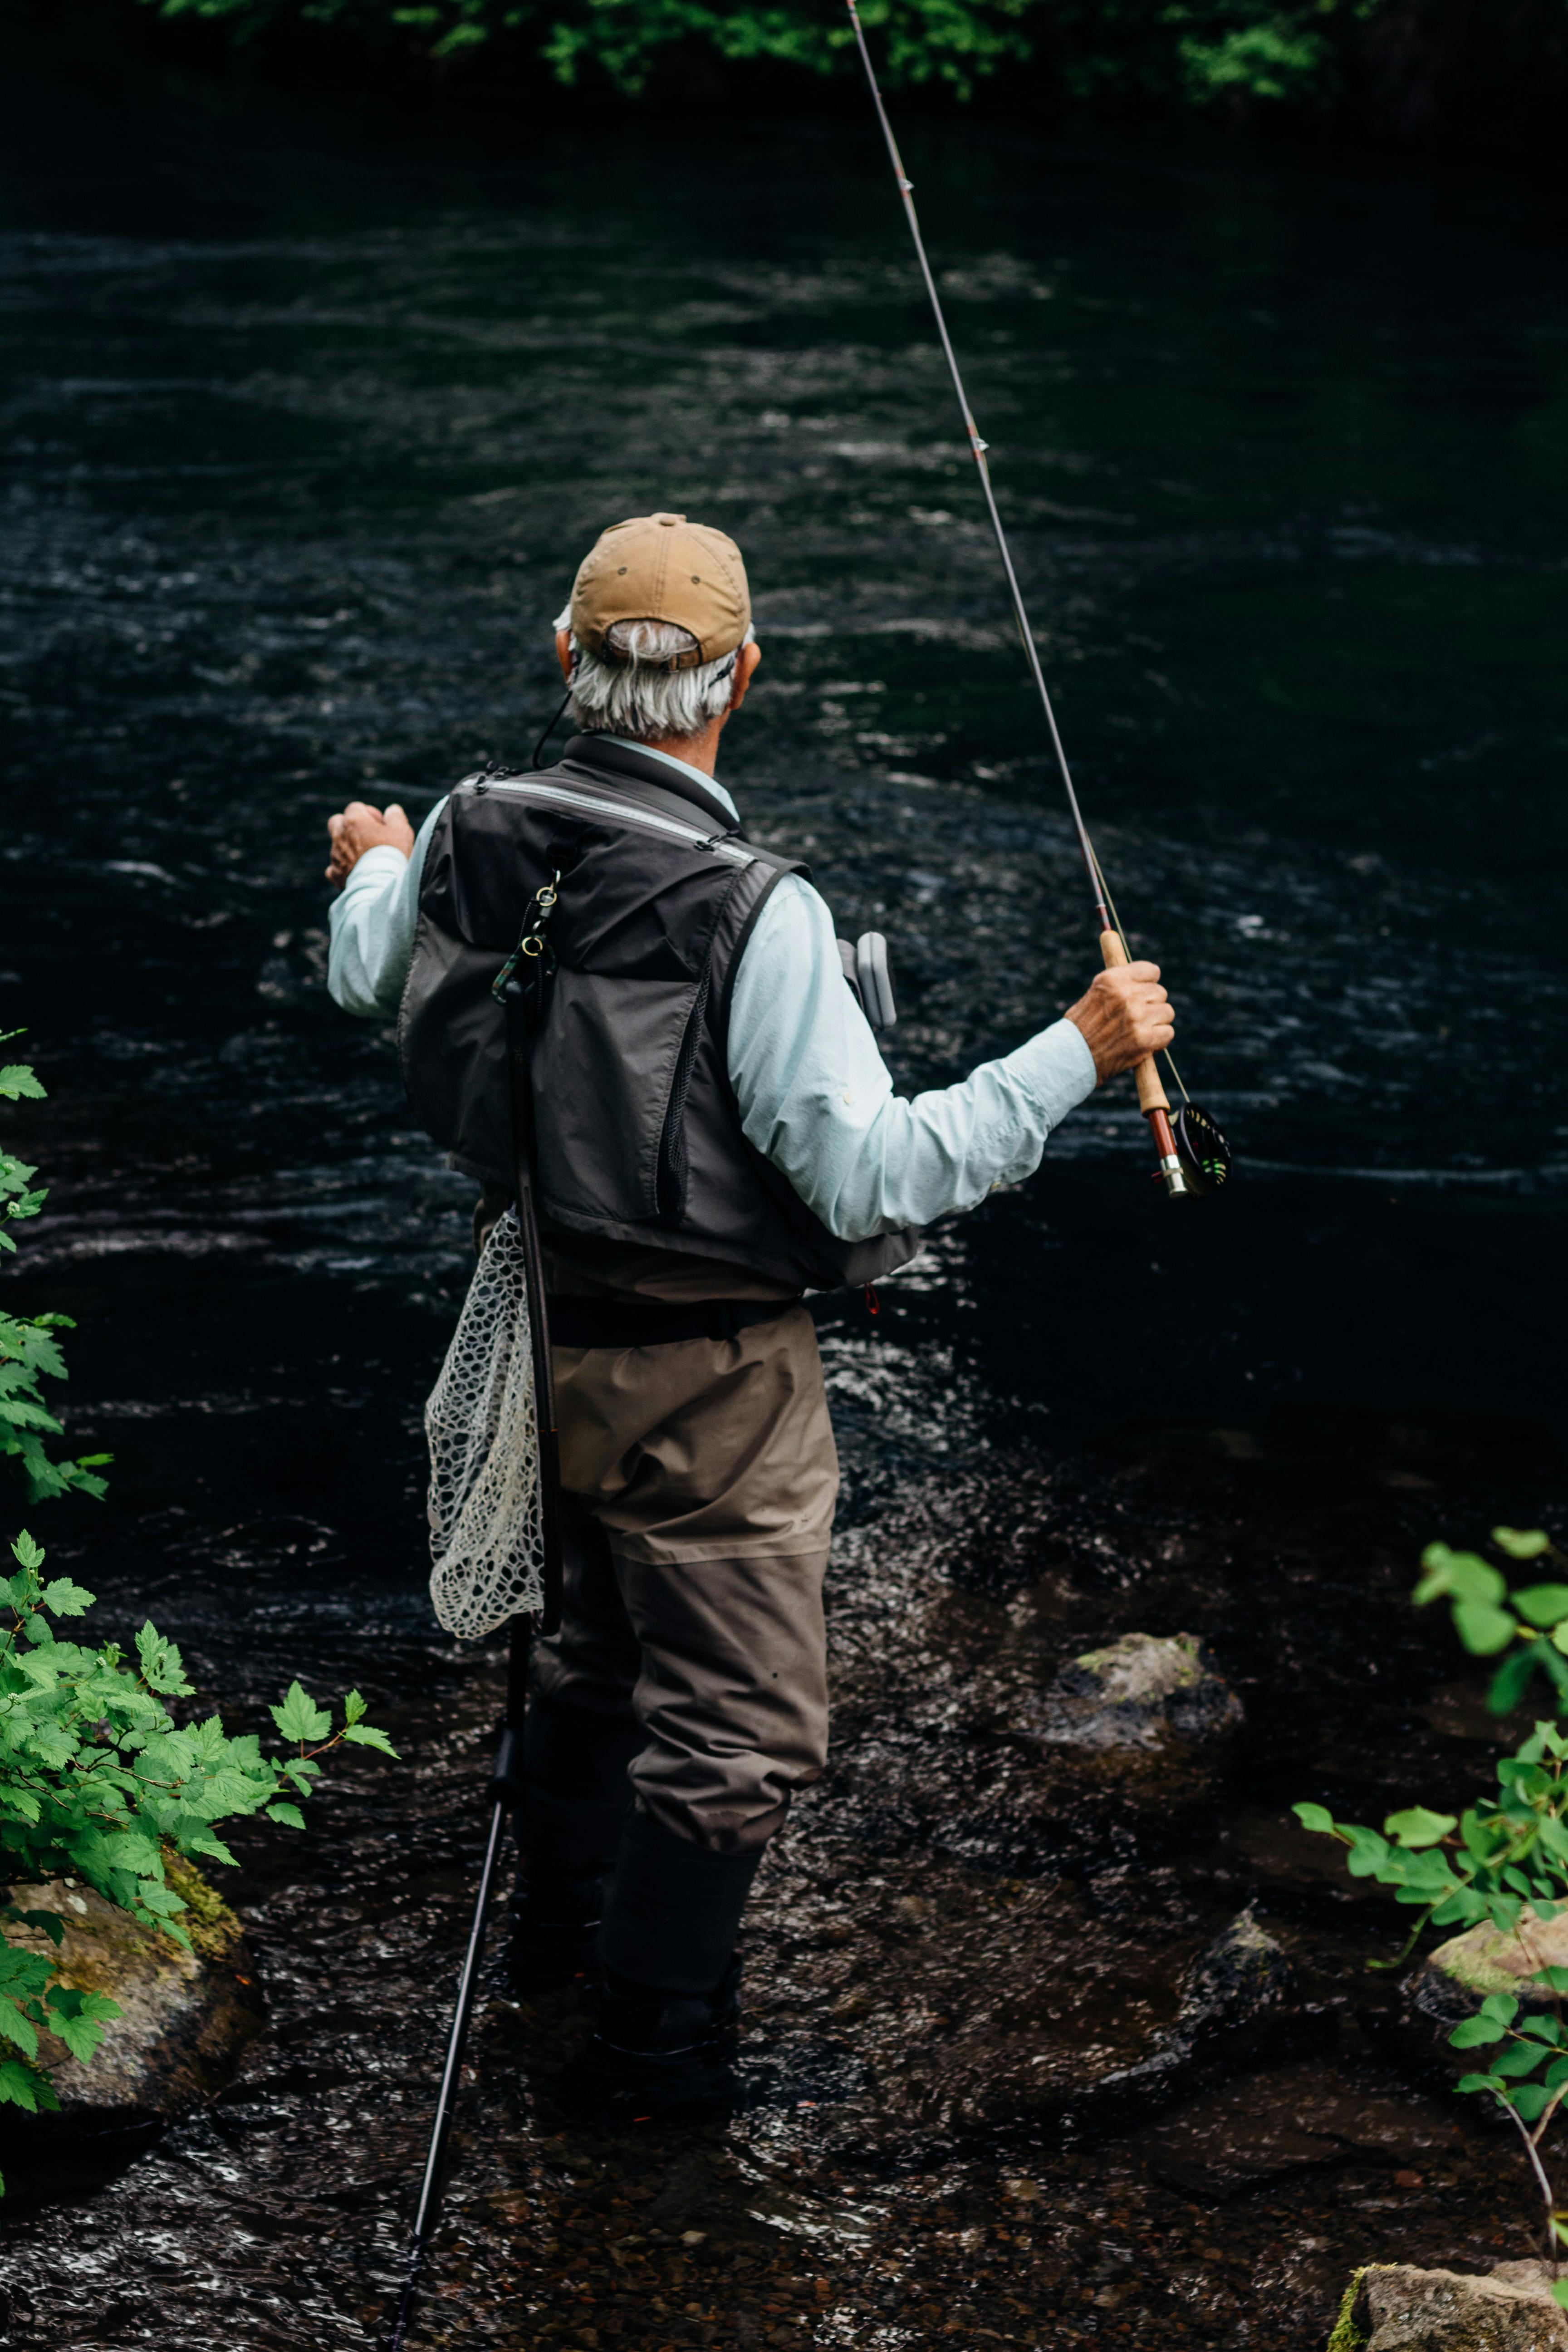 A fly fisherman standing in a river